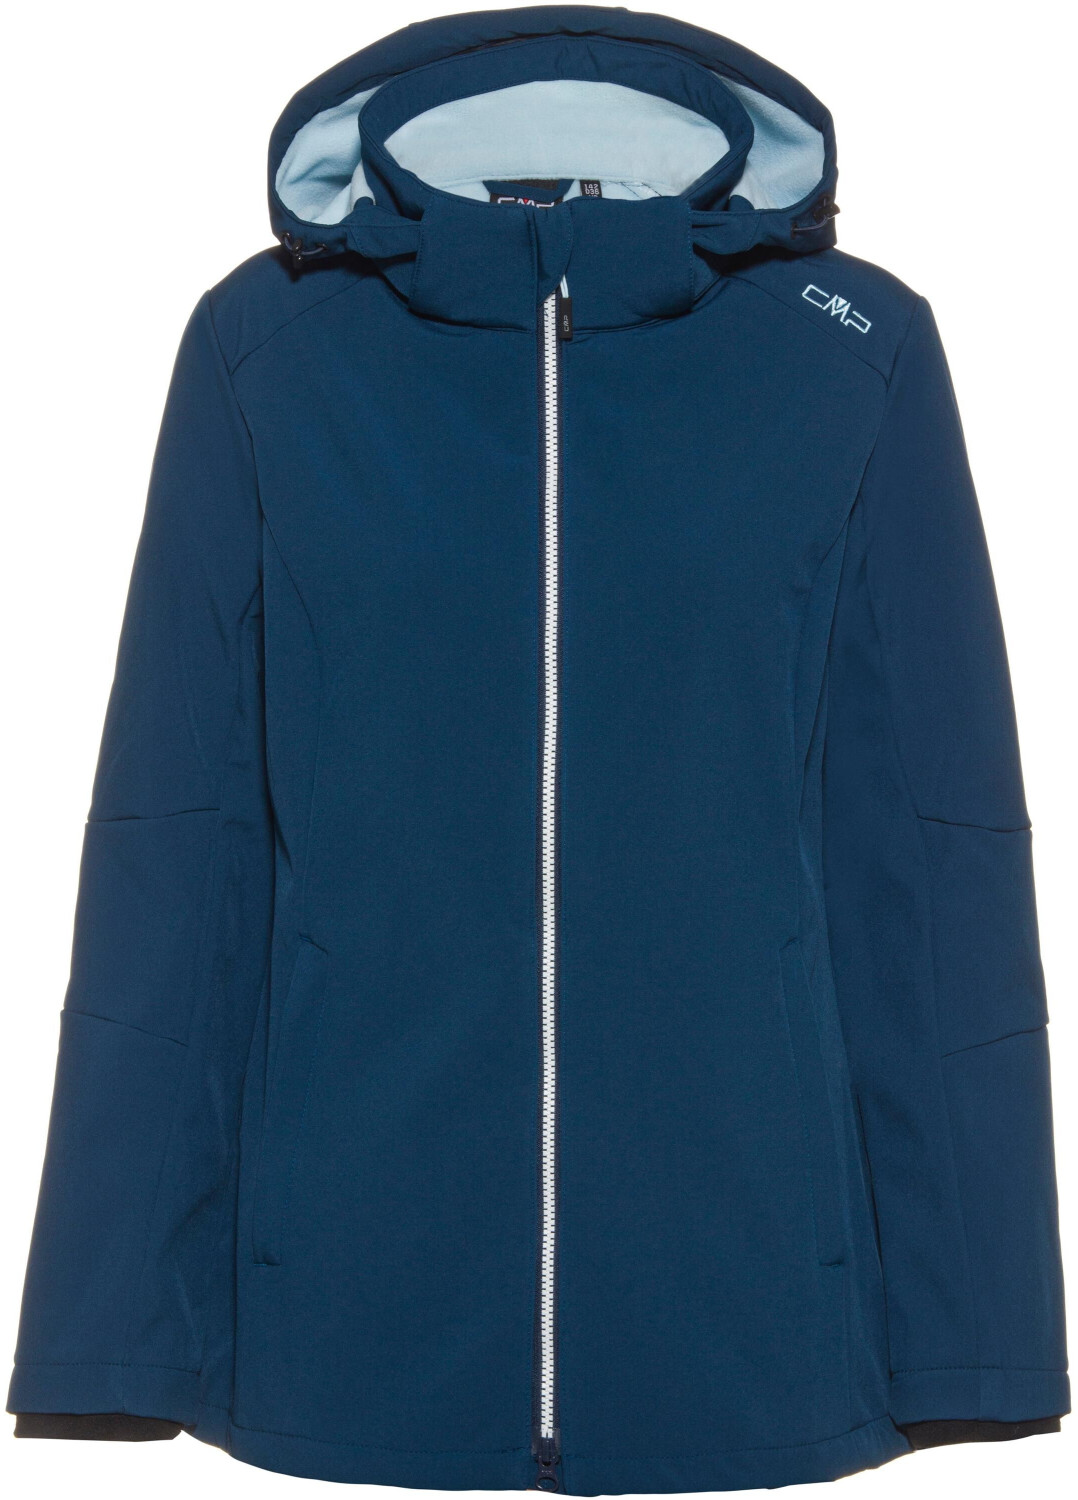 CMP Woman Softshell Long ink/cristal blue ab Preisvergleich With 39,99 Comfortable blue (3A22226) | bei € Fit Jacket